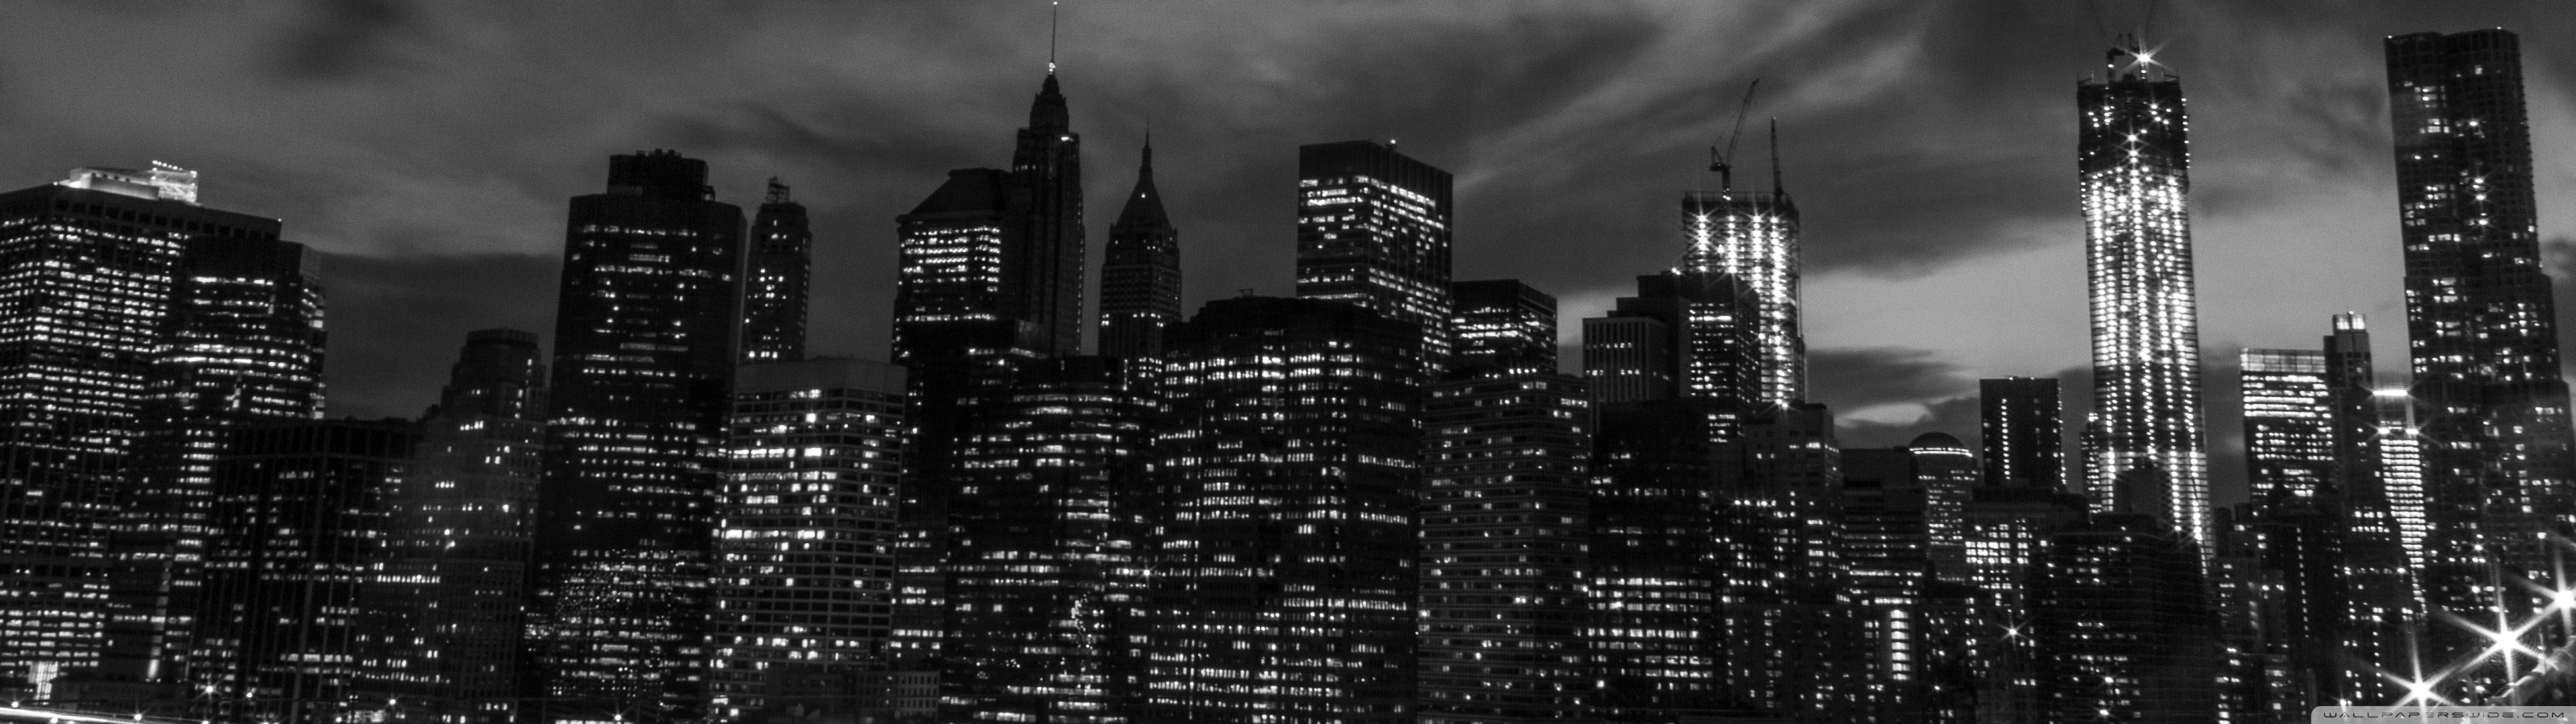 New York City Black And White At Night Ultra HD Desktop Background Wallpaper for: Widescreen & UltraWide Desktop & Laptop, Multi Display, Dual Monitor, Tablet